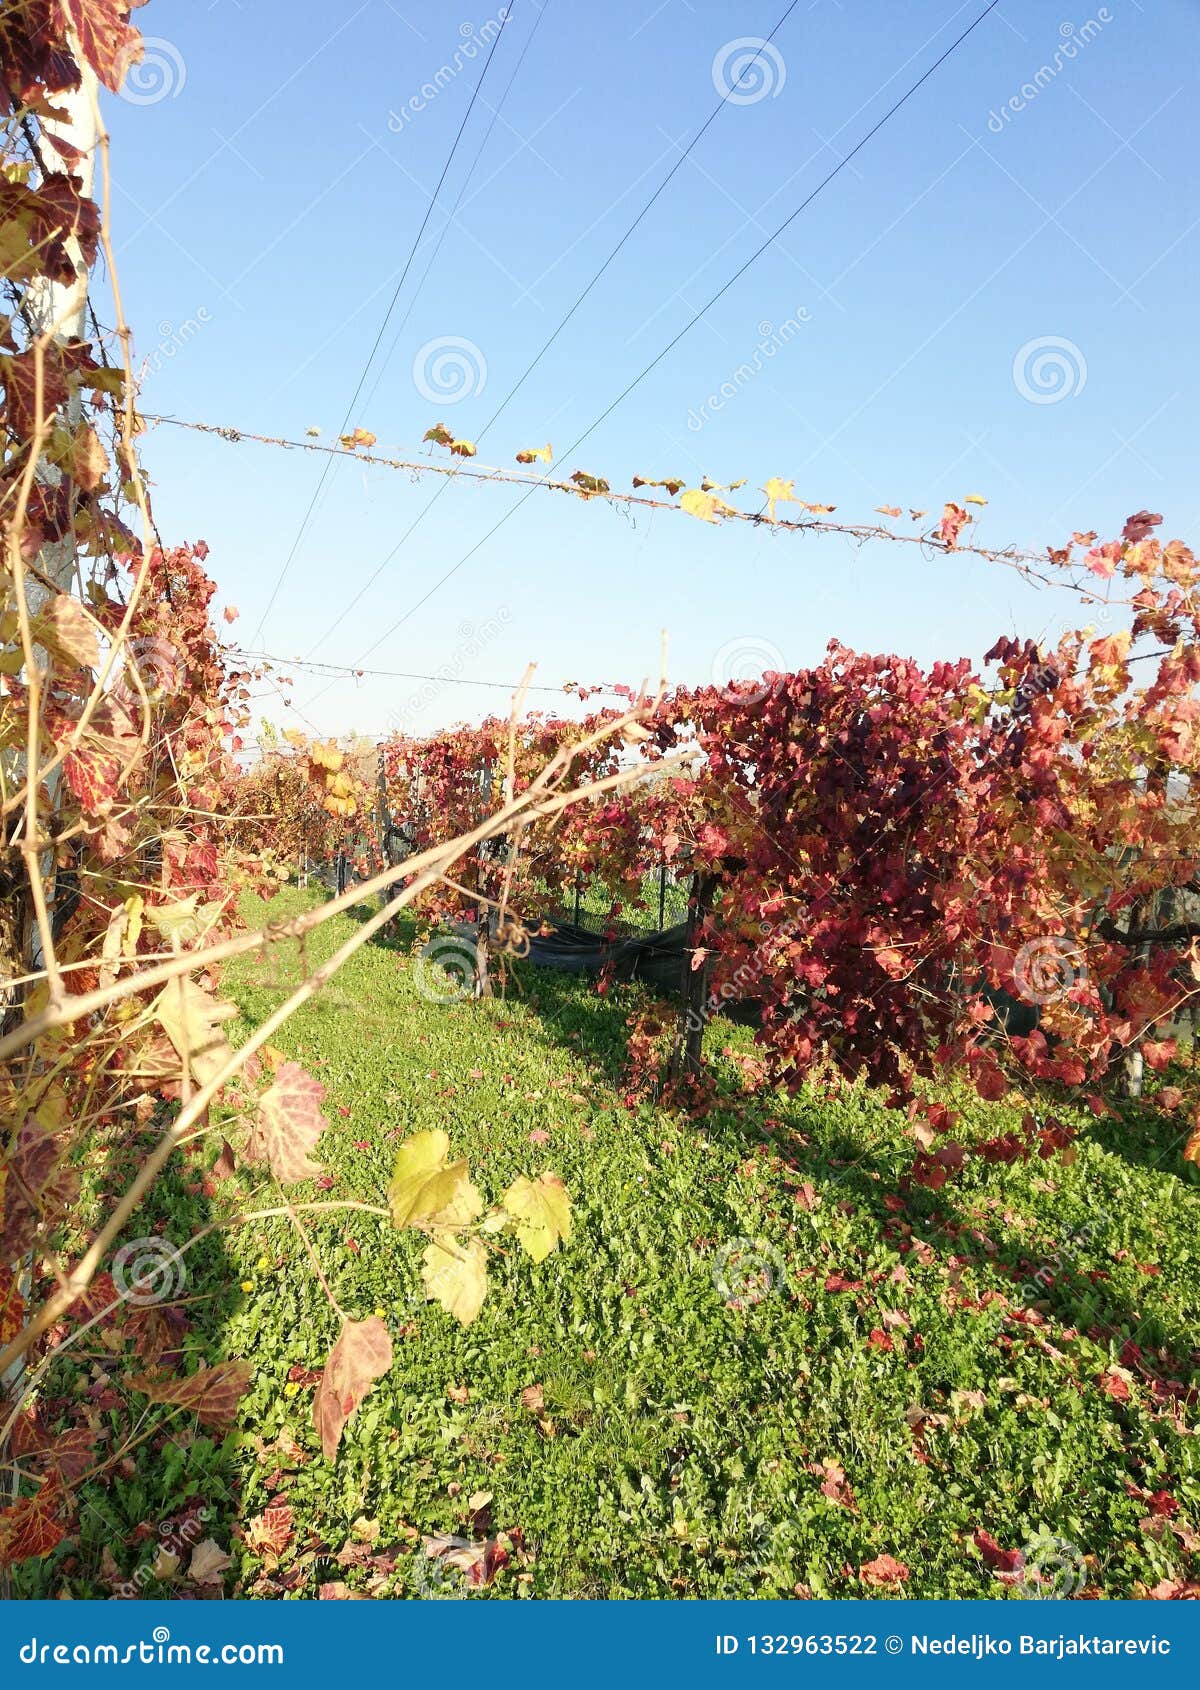 Vine in Autumn.vineyard in Italy Stock Photo - Image of scenery, nature ...